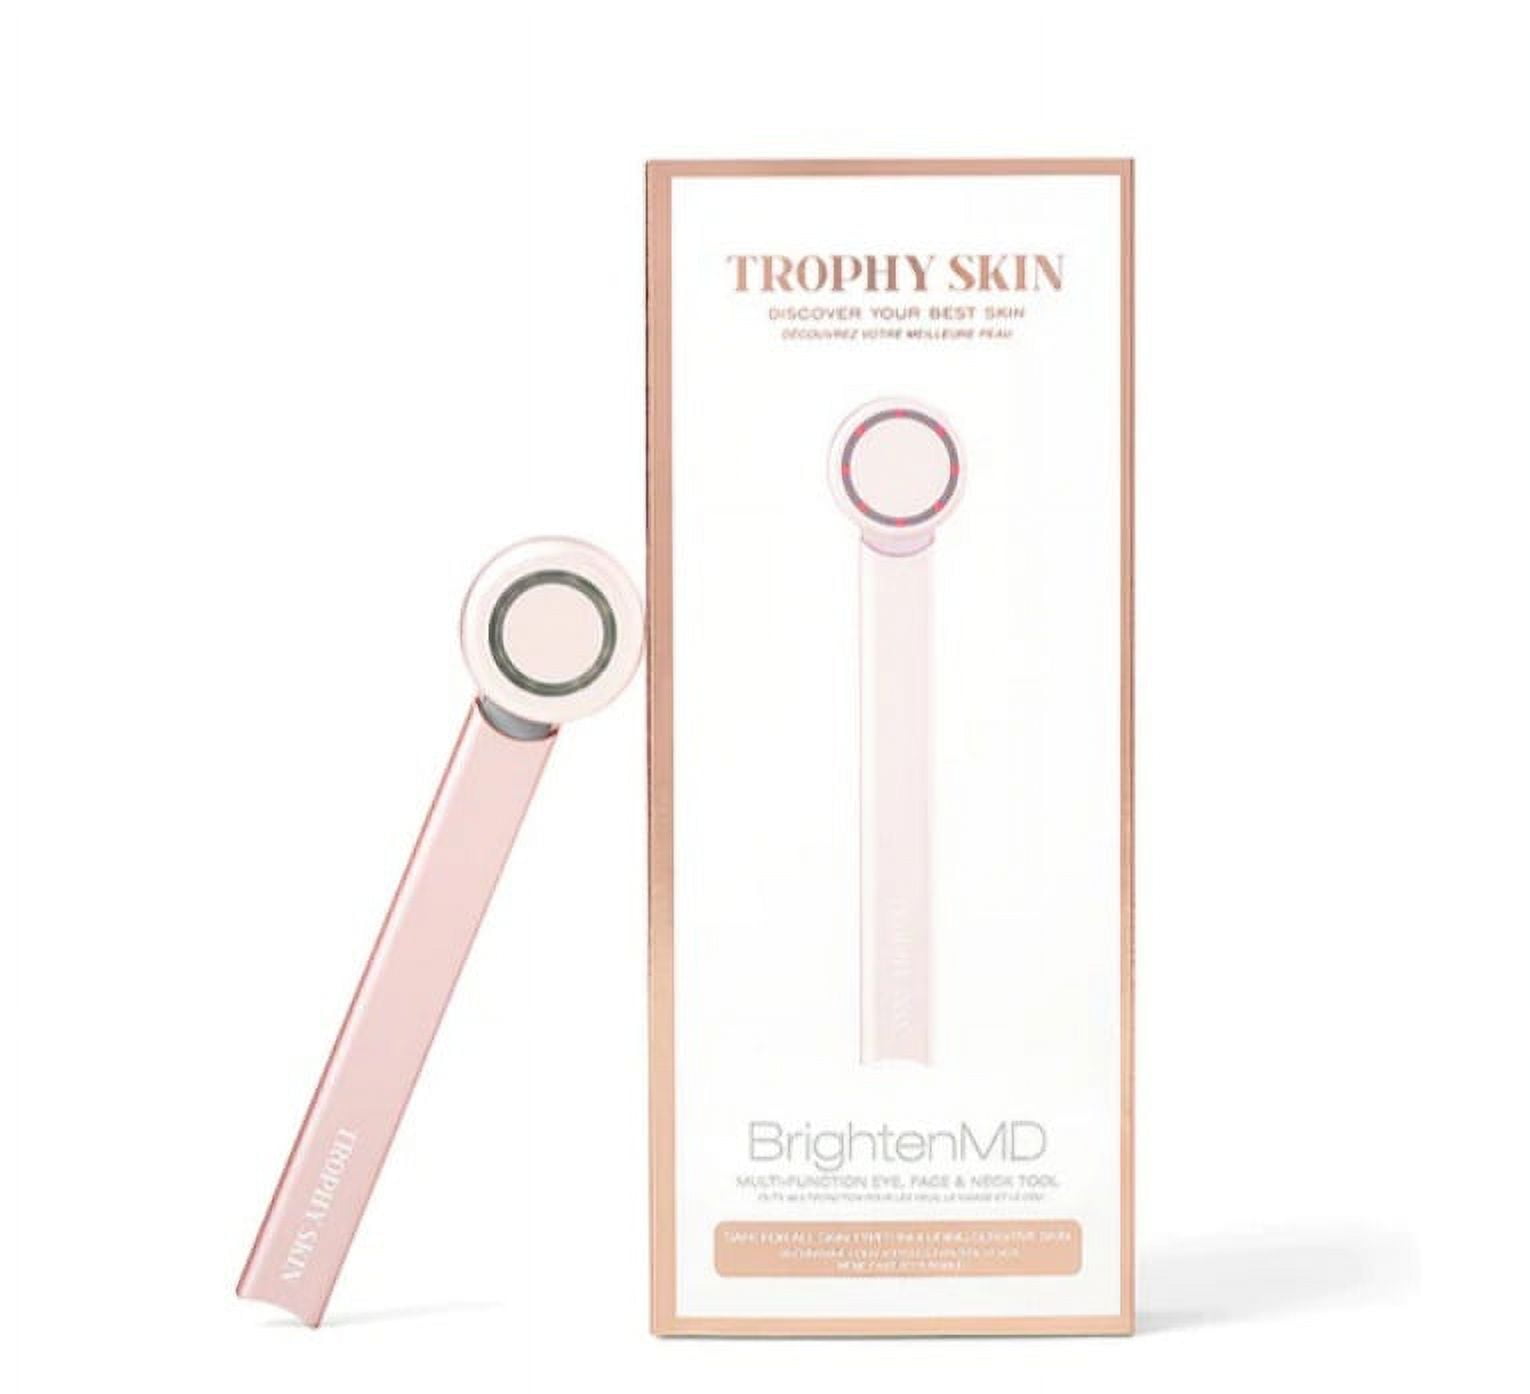 BrightenMD by TROPHY SKIN, Skin, Skincare Tools